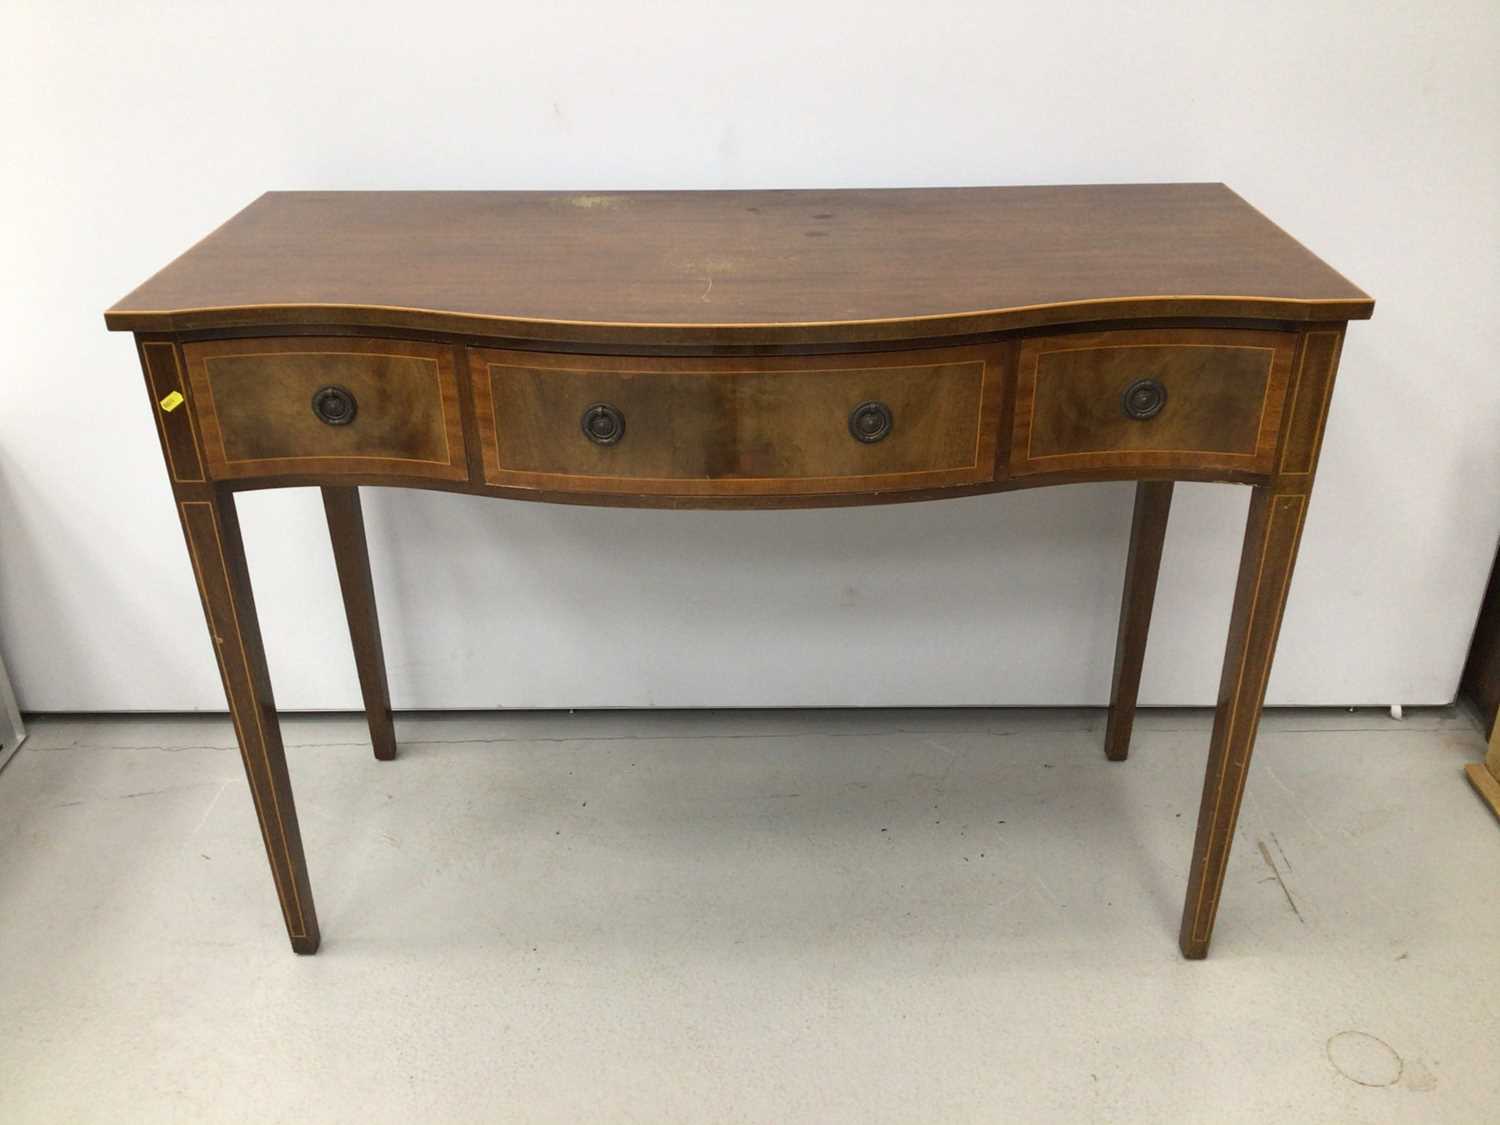 Lot 93 - Georgian style inlaid mahogany serpentine fronted serving table with three drawers on square taper legs, 122.5cm wide, 49cm deep, 87.5cm high